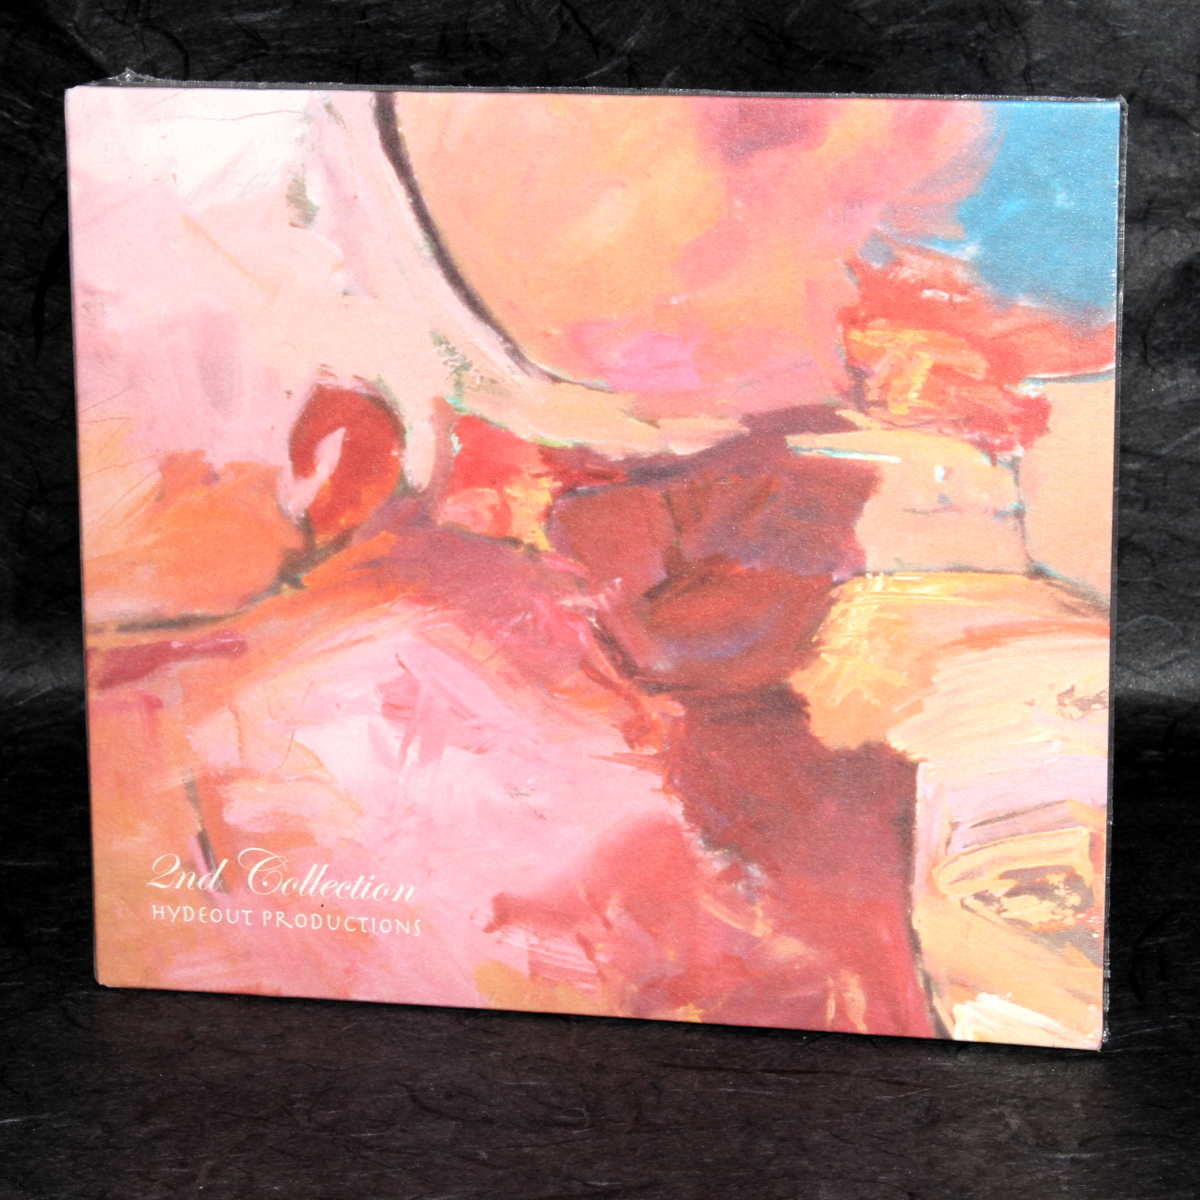 Nujabes 2nd Collections Hydeout Productions Clammbon — imaginary folklore 04:10. nujabes 2nd collections hydeout productions